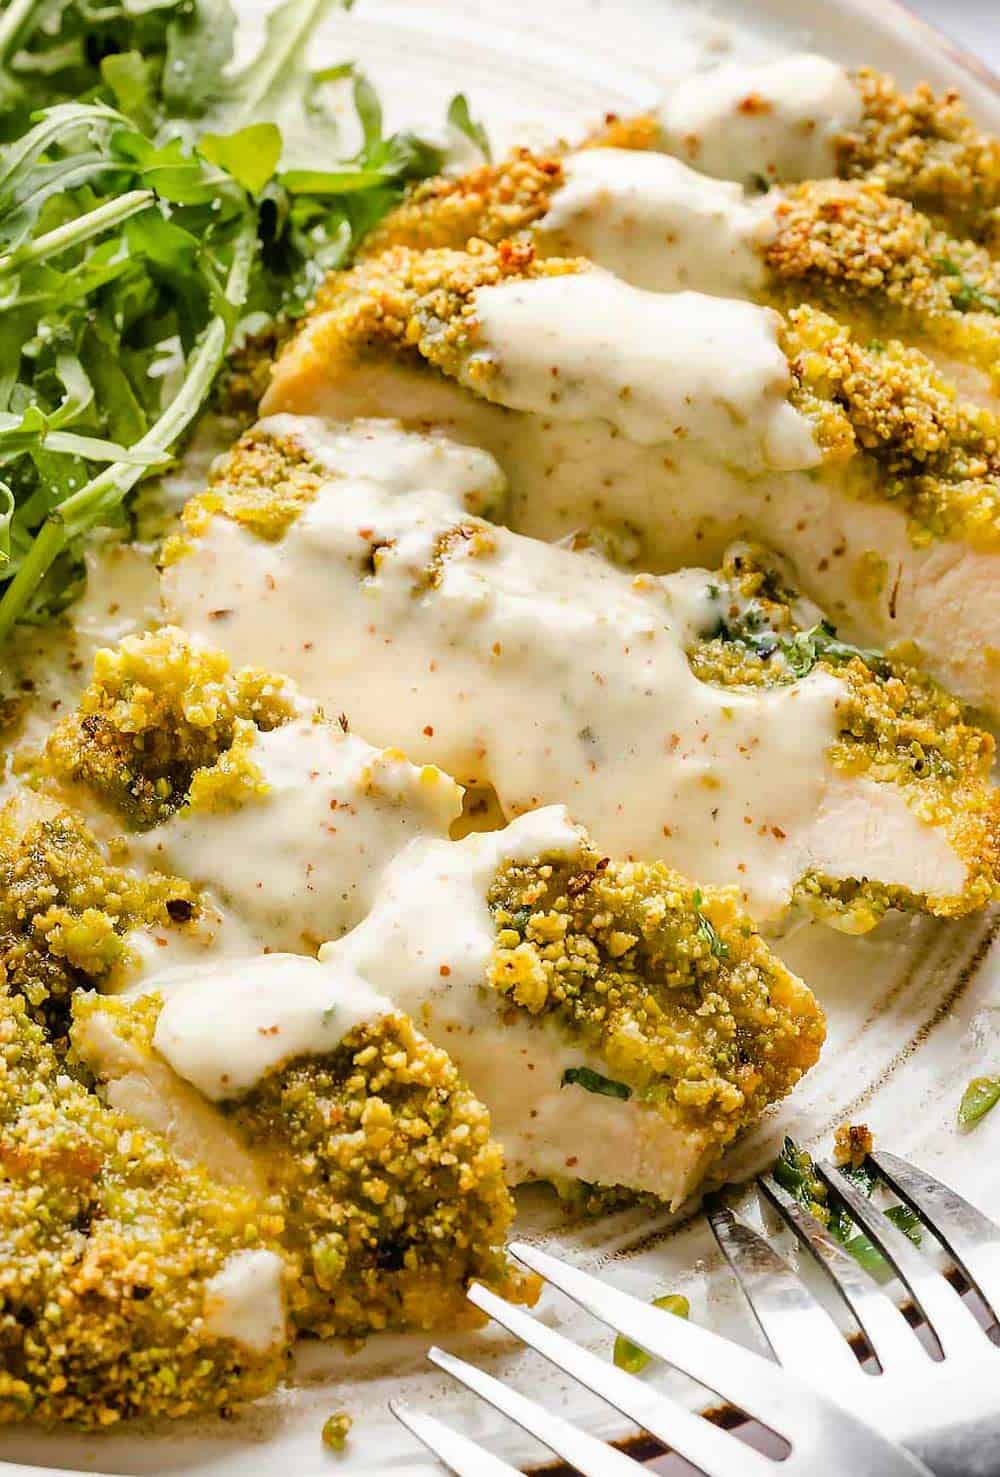 Sliced pistachio crusted chicken on plate with honey garlic sauce/ Pistachio Crusted Chicken